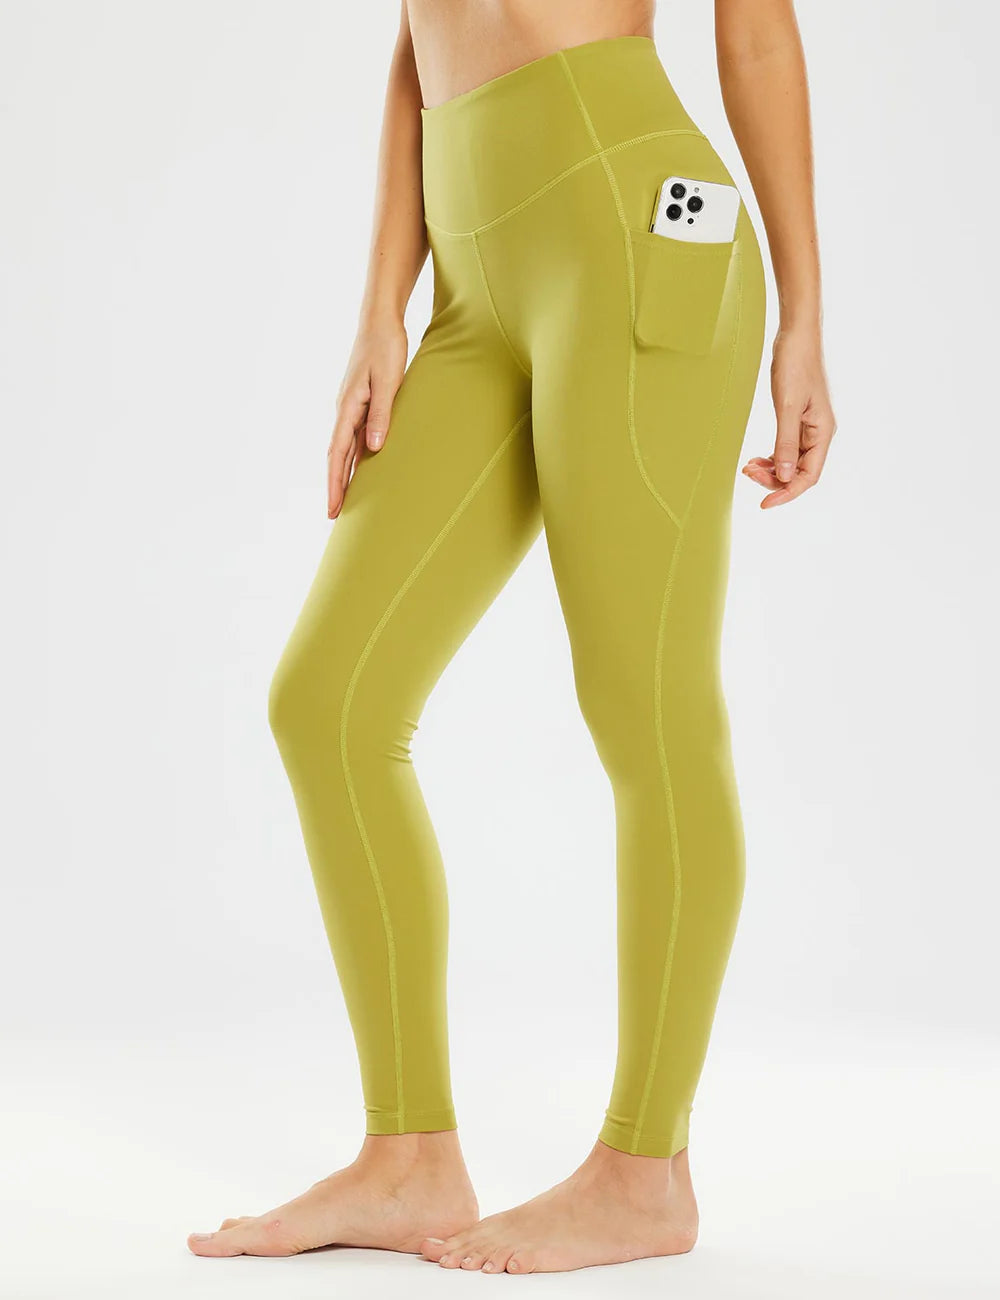 The Best Yoga Pants for Women To Make Those Awesome Poses and